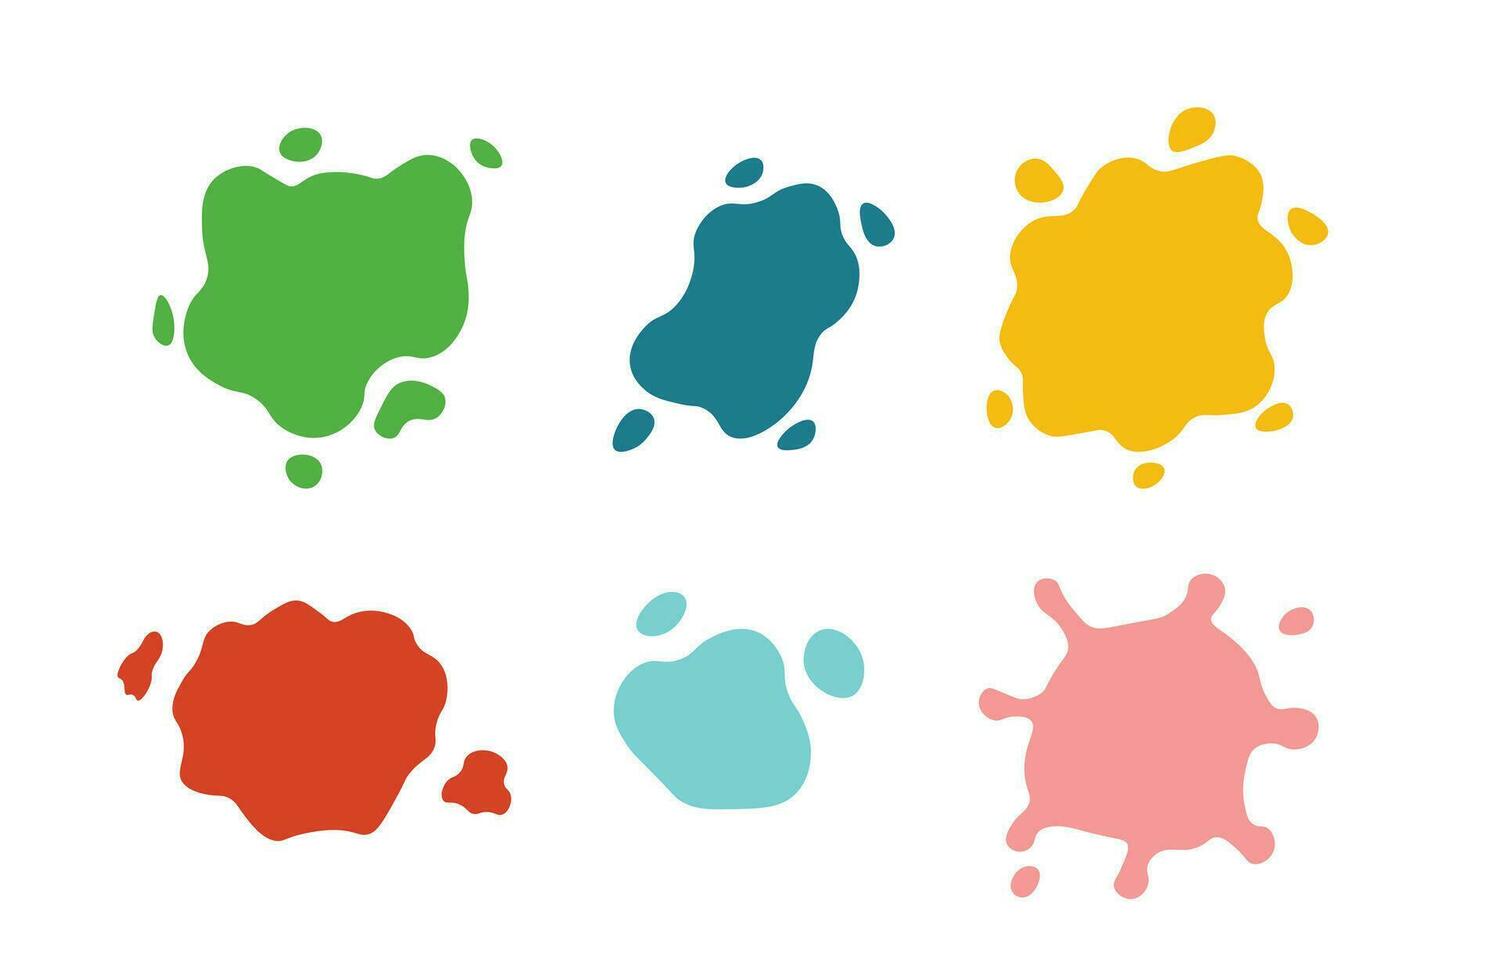 Color splashes set with different shades and shapes. Vector stains drops cartoon style.